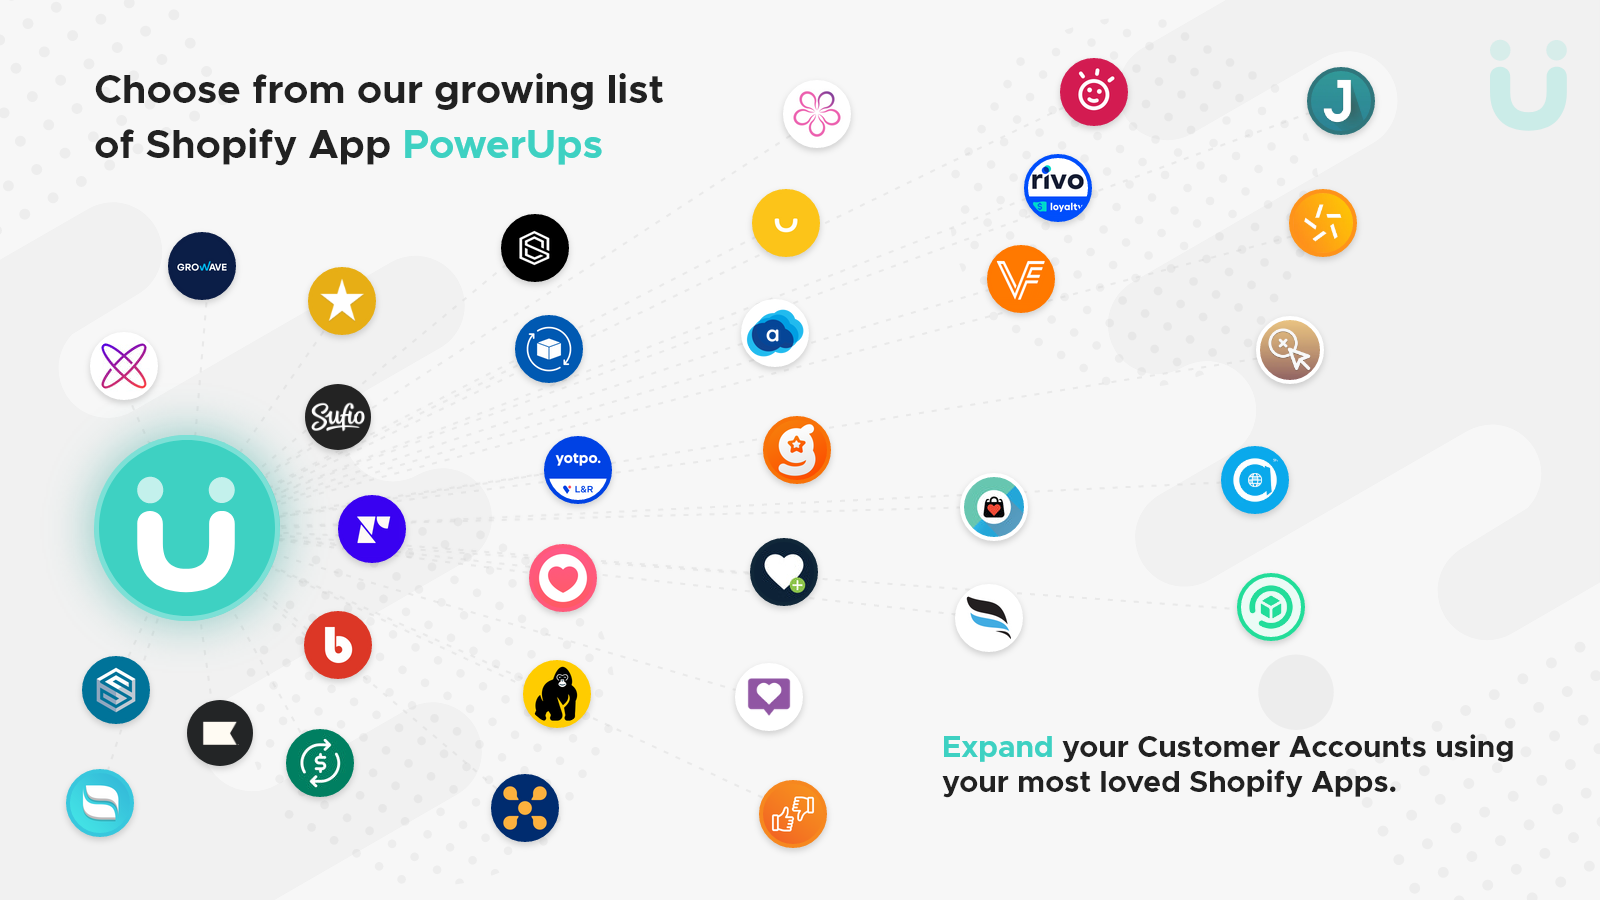 Choose from our growing list of 75 PowerUps - now with Klaviyo!